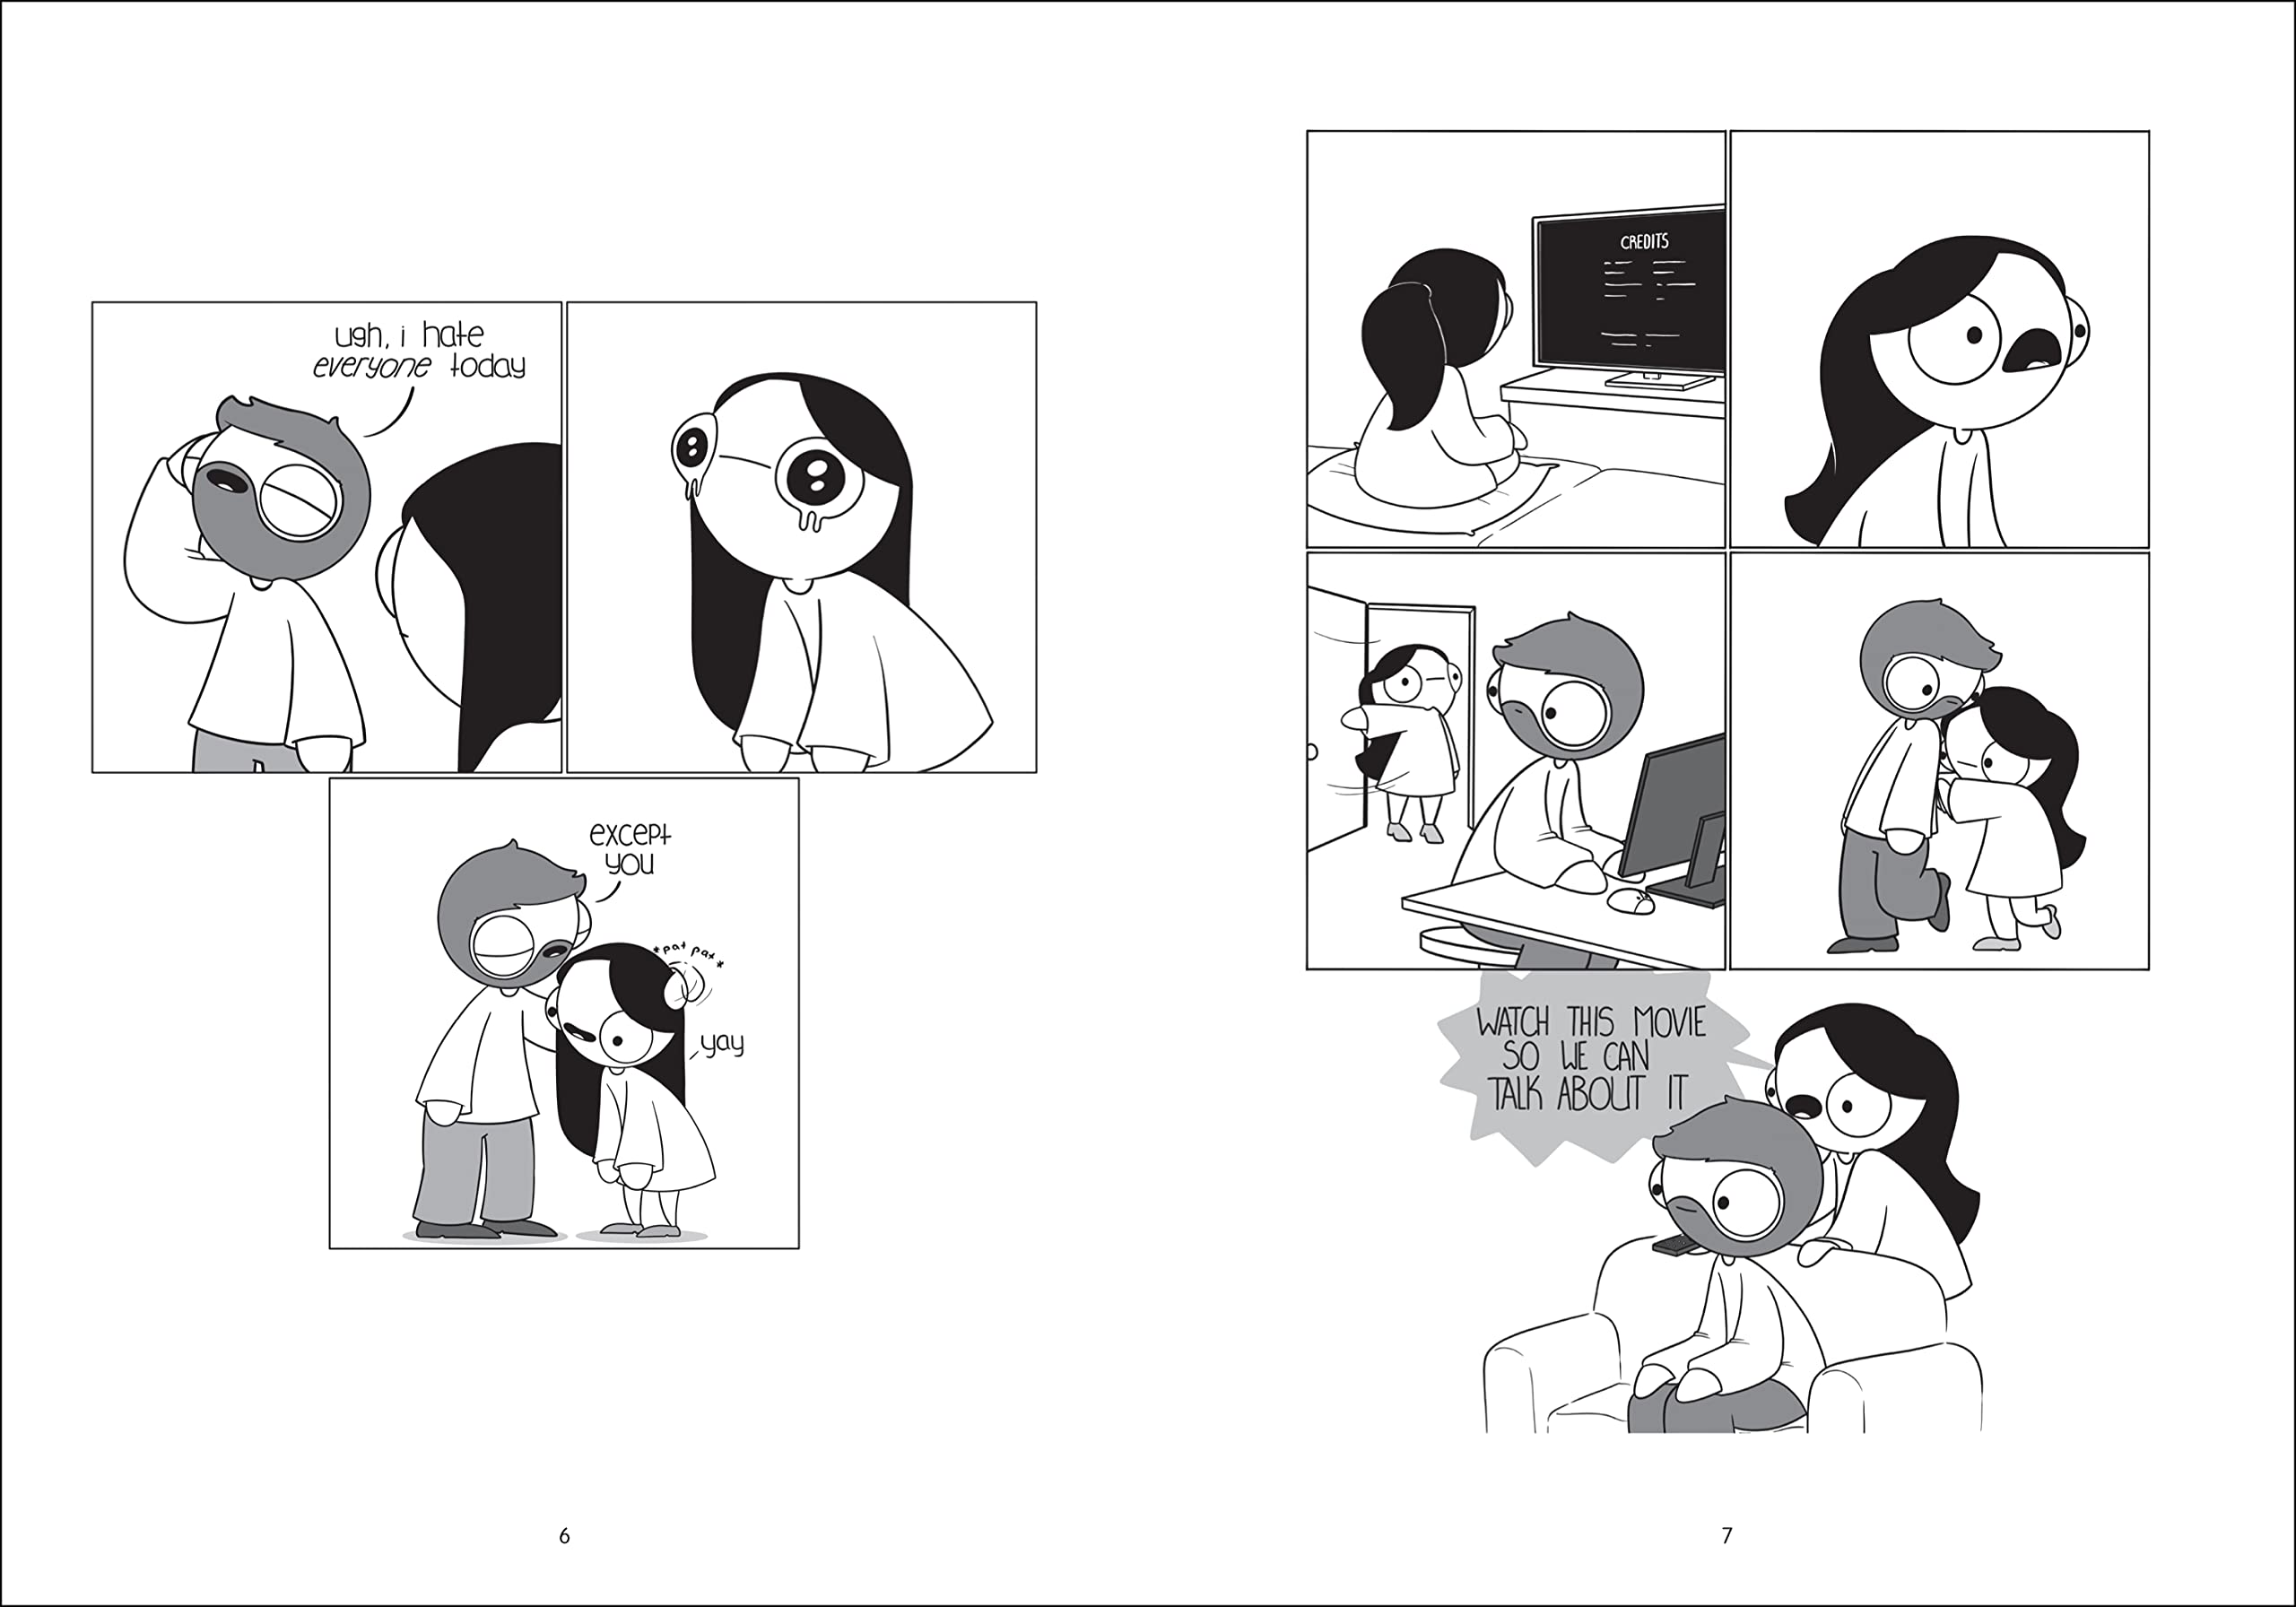 In Love & Pajamas: A Collection of Comics about Being Yourself Together